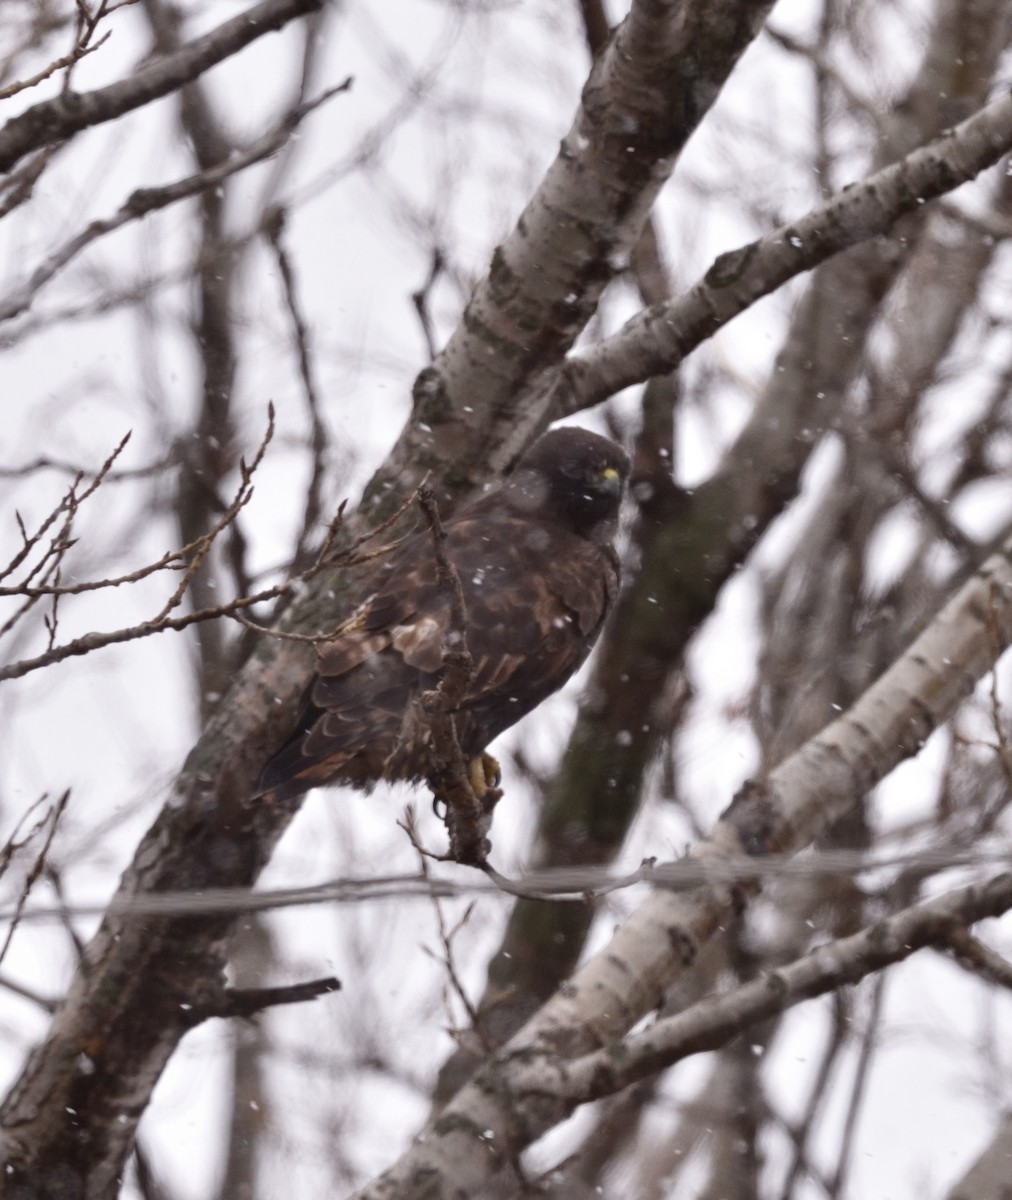 Red-tailed Hawk (calurus/alascensis) - Steve Goodbred